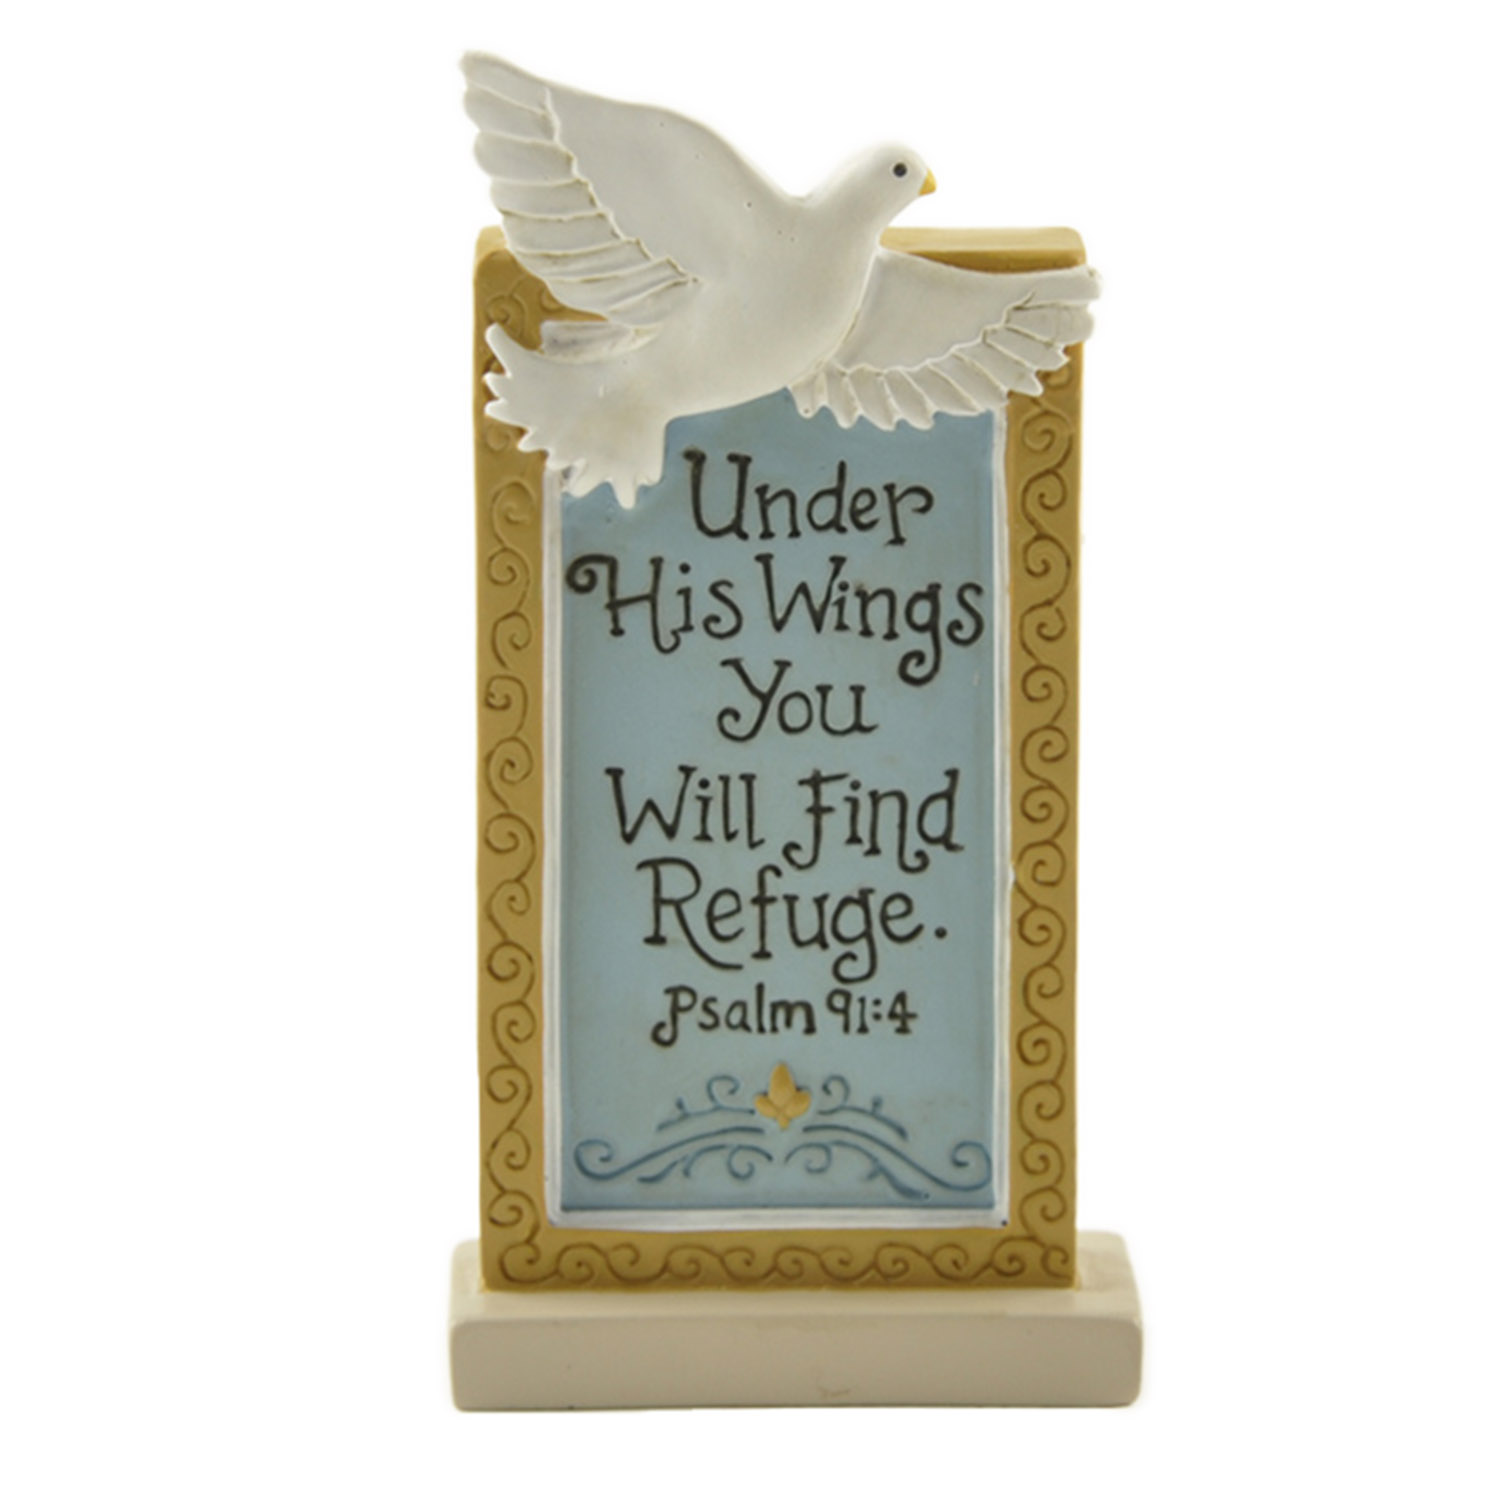 Inspirational Resin Plaque with Dove and Psalm 91:4 Inscription – 'Under His Wings You Will Find Refuge' – Elegant Religious Home Decor 151-89249